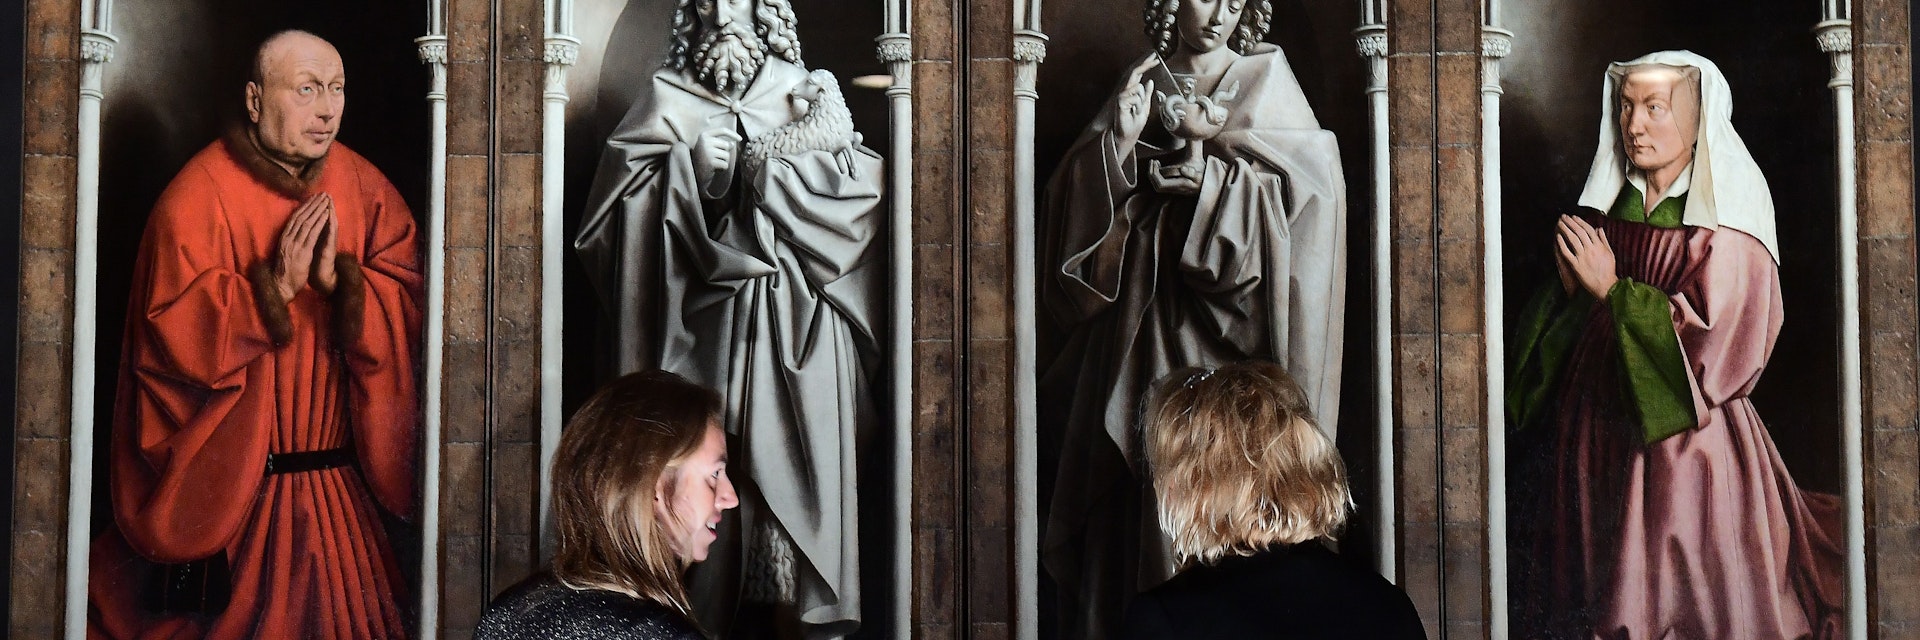 Officials unveil the restored exterior panels of "The Adoration of the Mystic Lamb", an altar piece painted by the Van Eyck brothers in 1432, at Saint Bavo Cathedral in Ghent on October 12, 2016. .The restoration of the exterior panels and frames started in 2012, and constitutes the first phase of restauration which will be followed by two other phases for the interior panels and is set to last until 2020. / AFP / EMMANUEL DUNAND        (Photo credit should read EMMANUEL DUNAND/AFP/Getty Images)